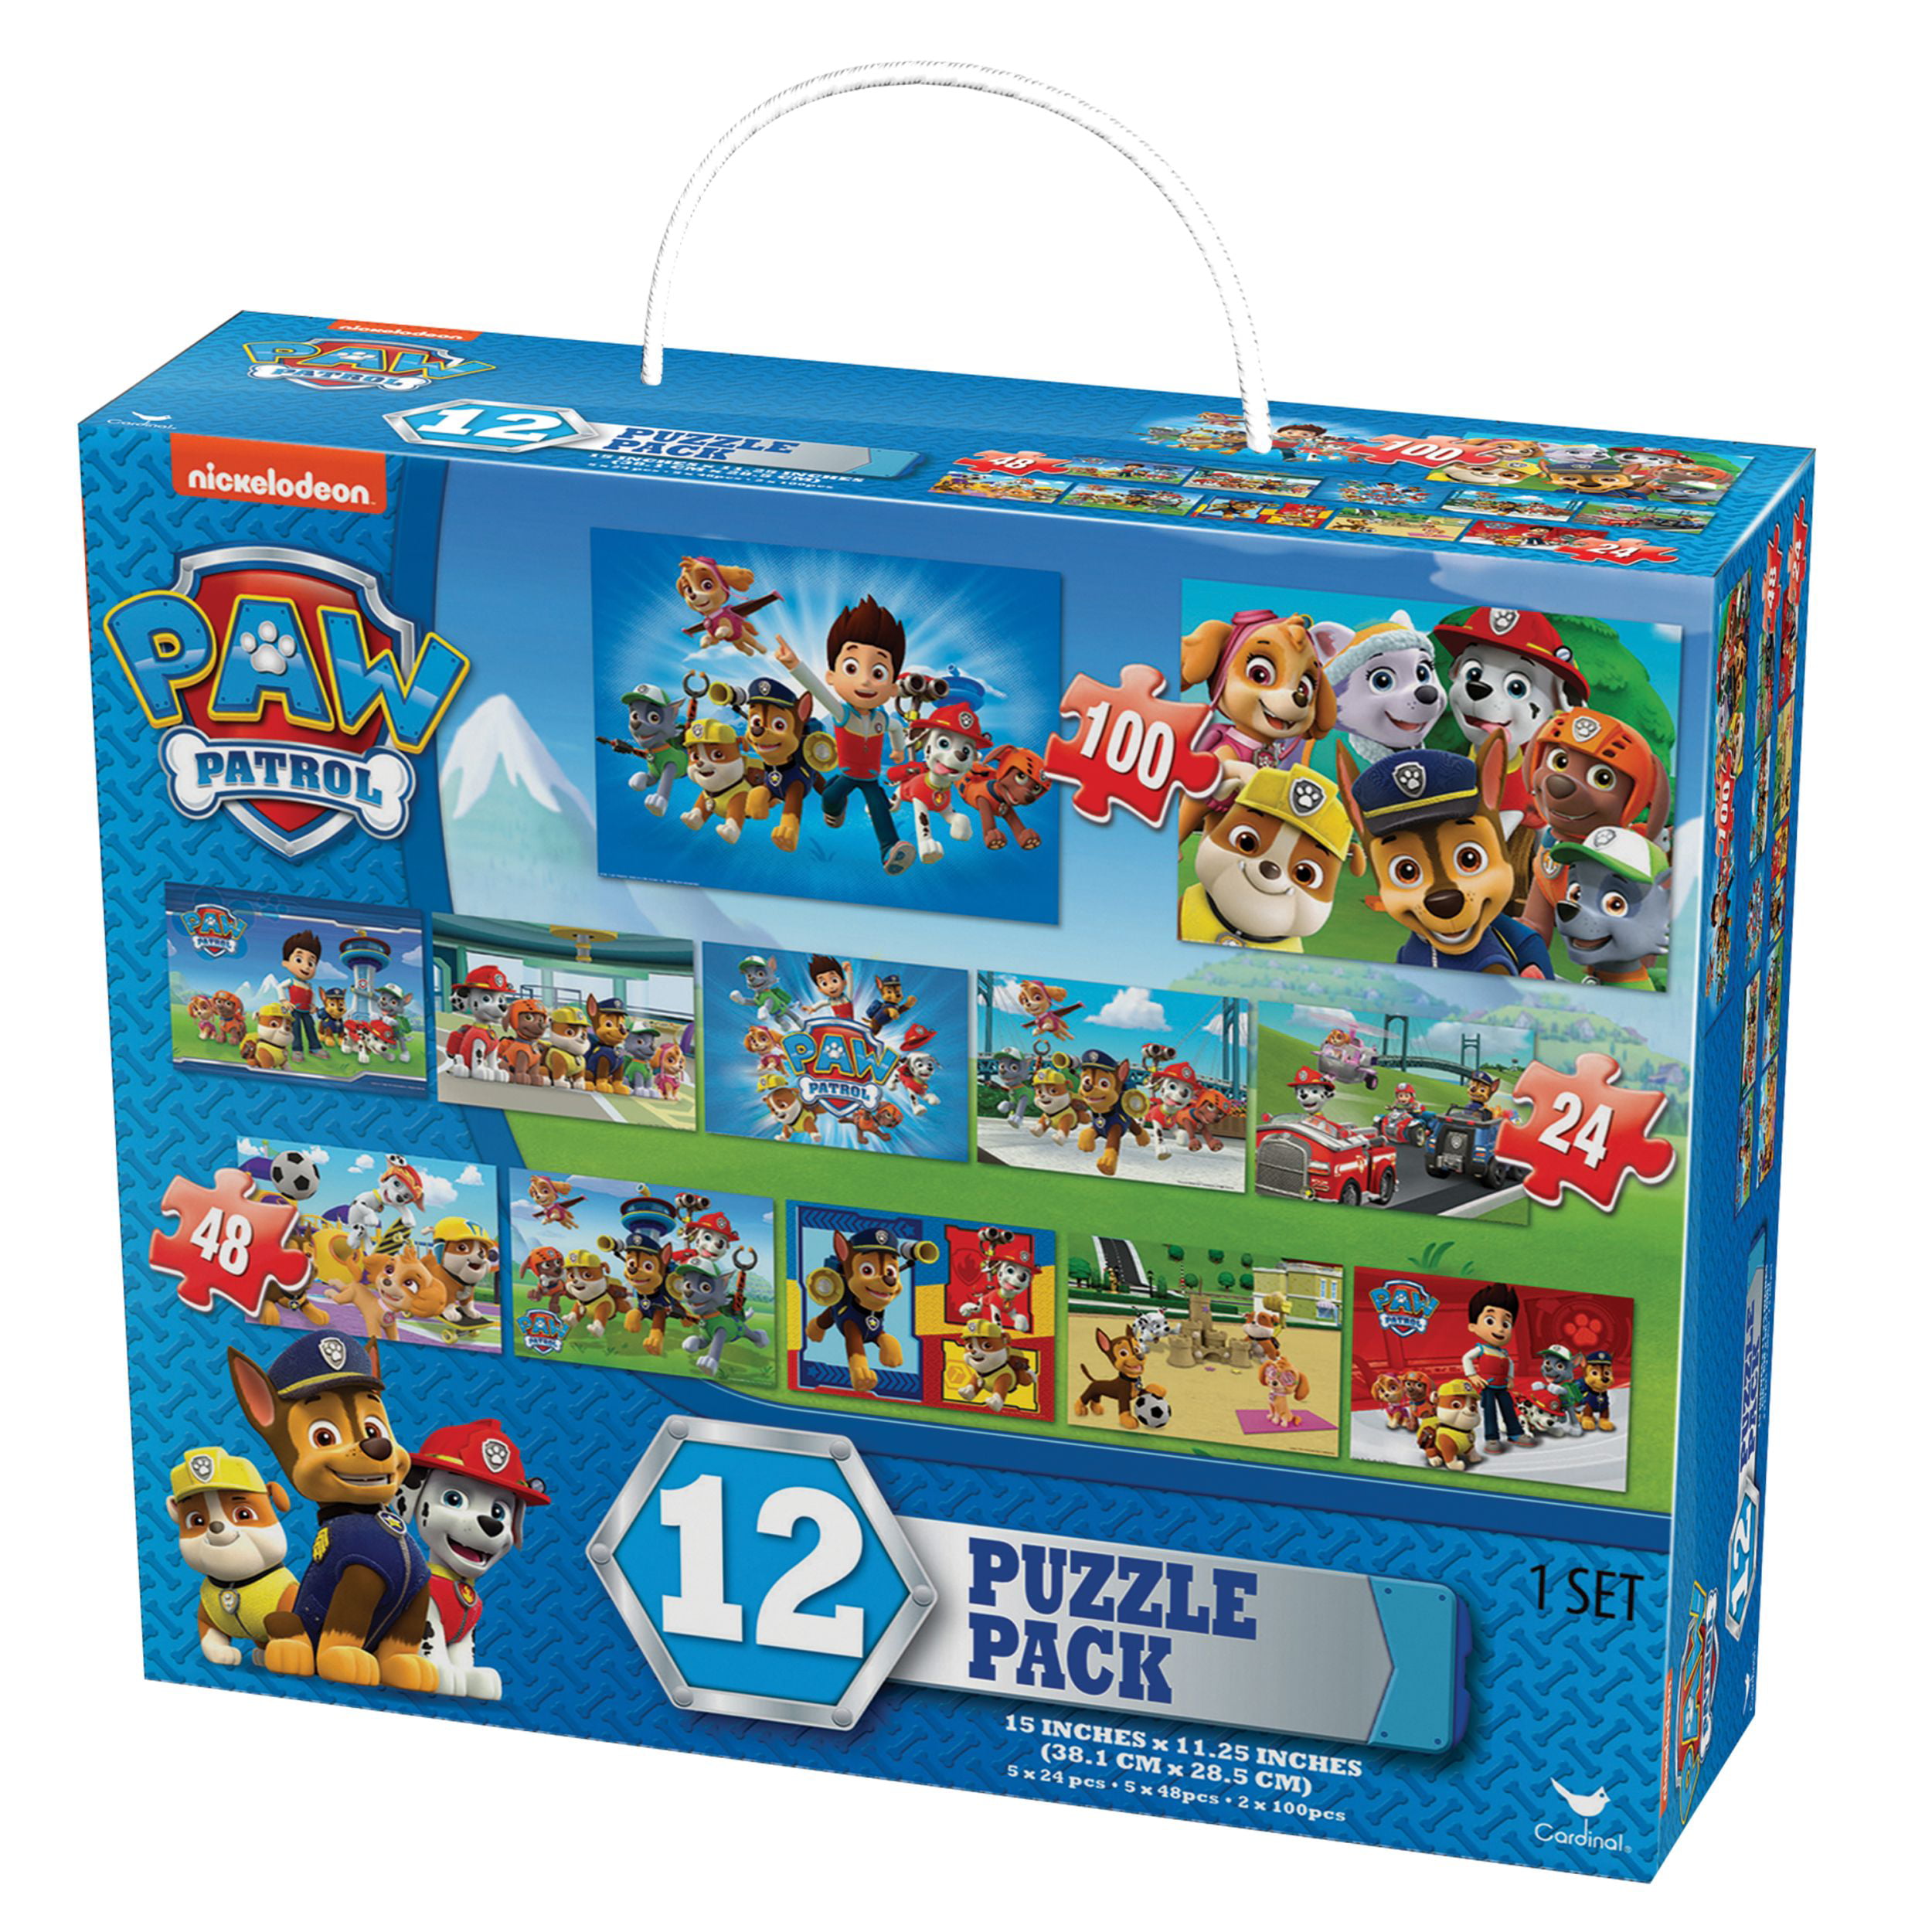 Paw Patrol Patrol 12 Puzzle Pack Childrens Jigsaw Puzzles 